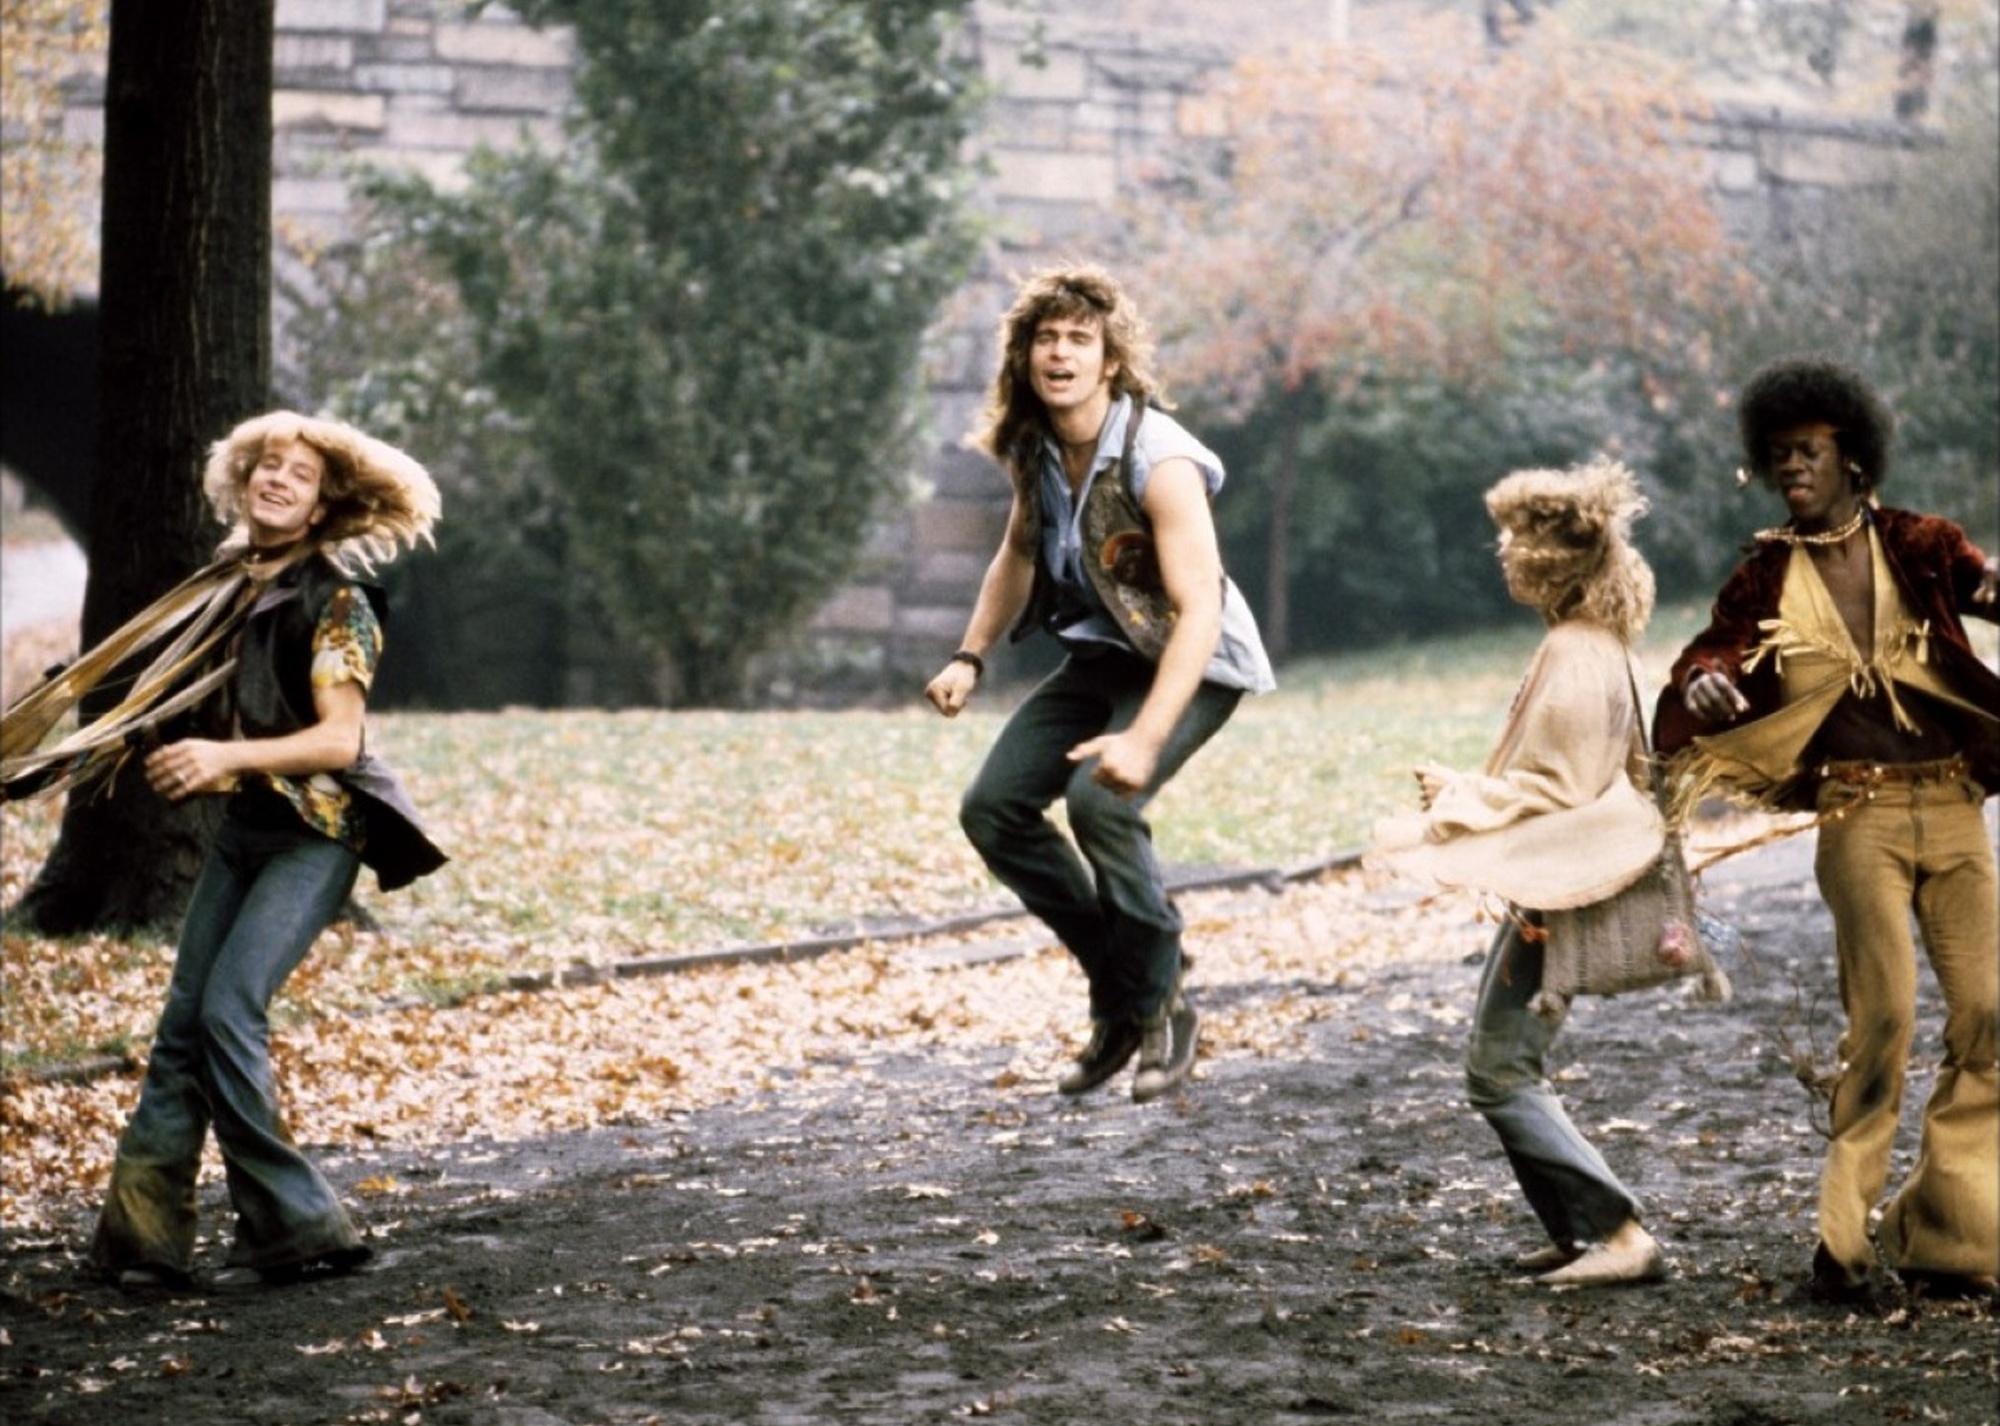 A group of hippies dancing in a park.